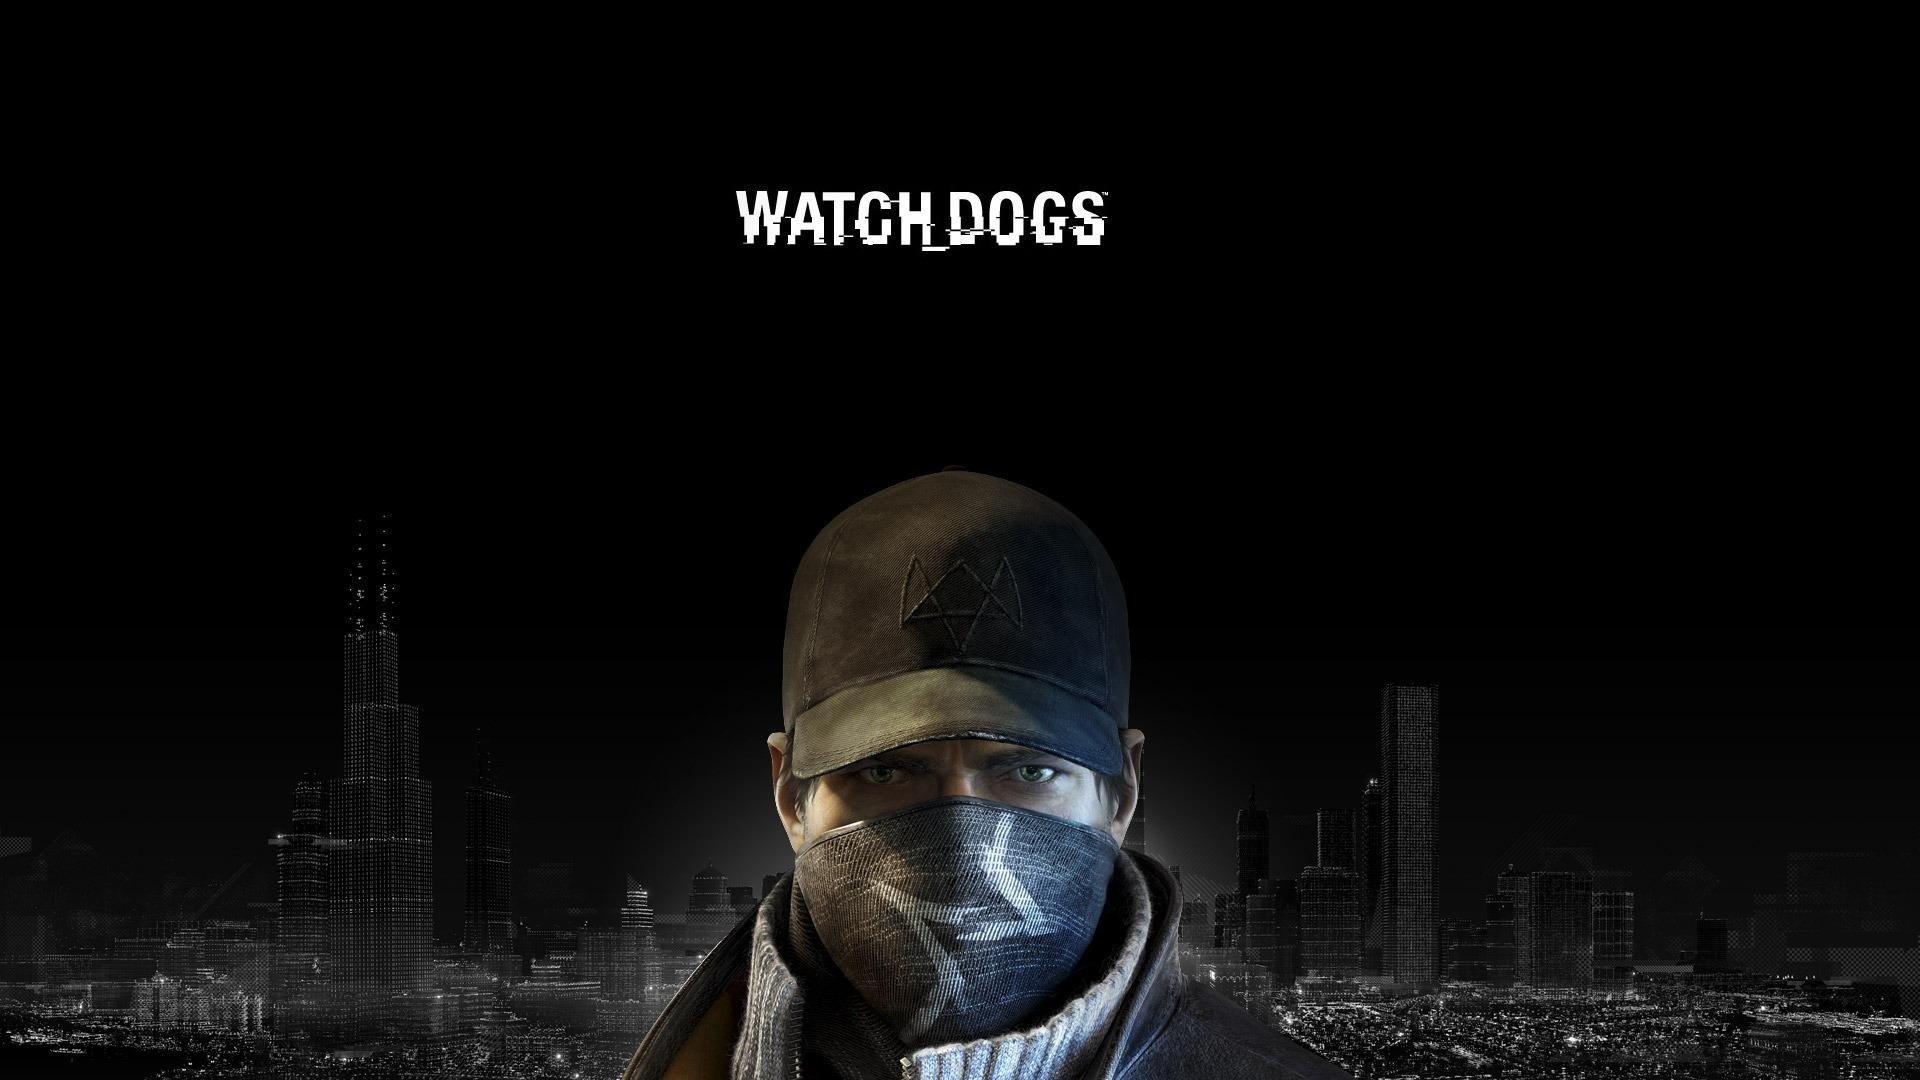 Best Watch Dogs wallpaper ID:117334 for High Resolution full hd computer